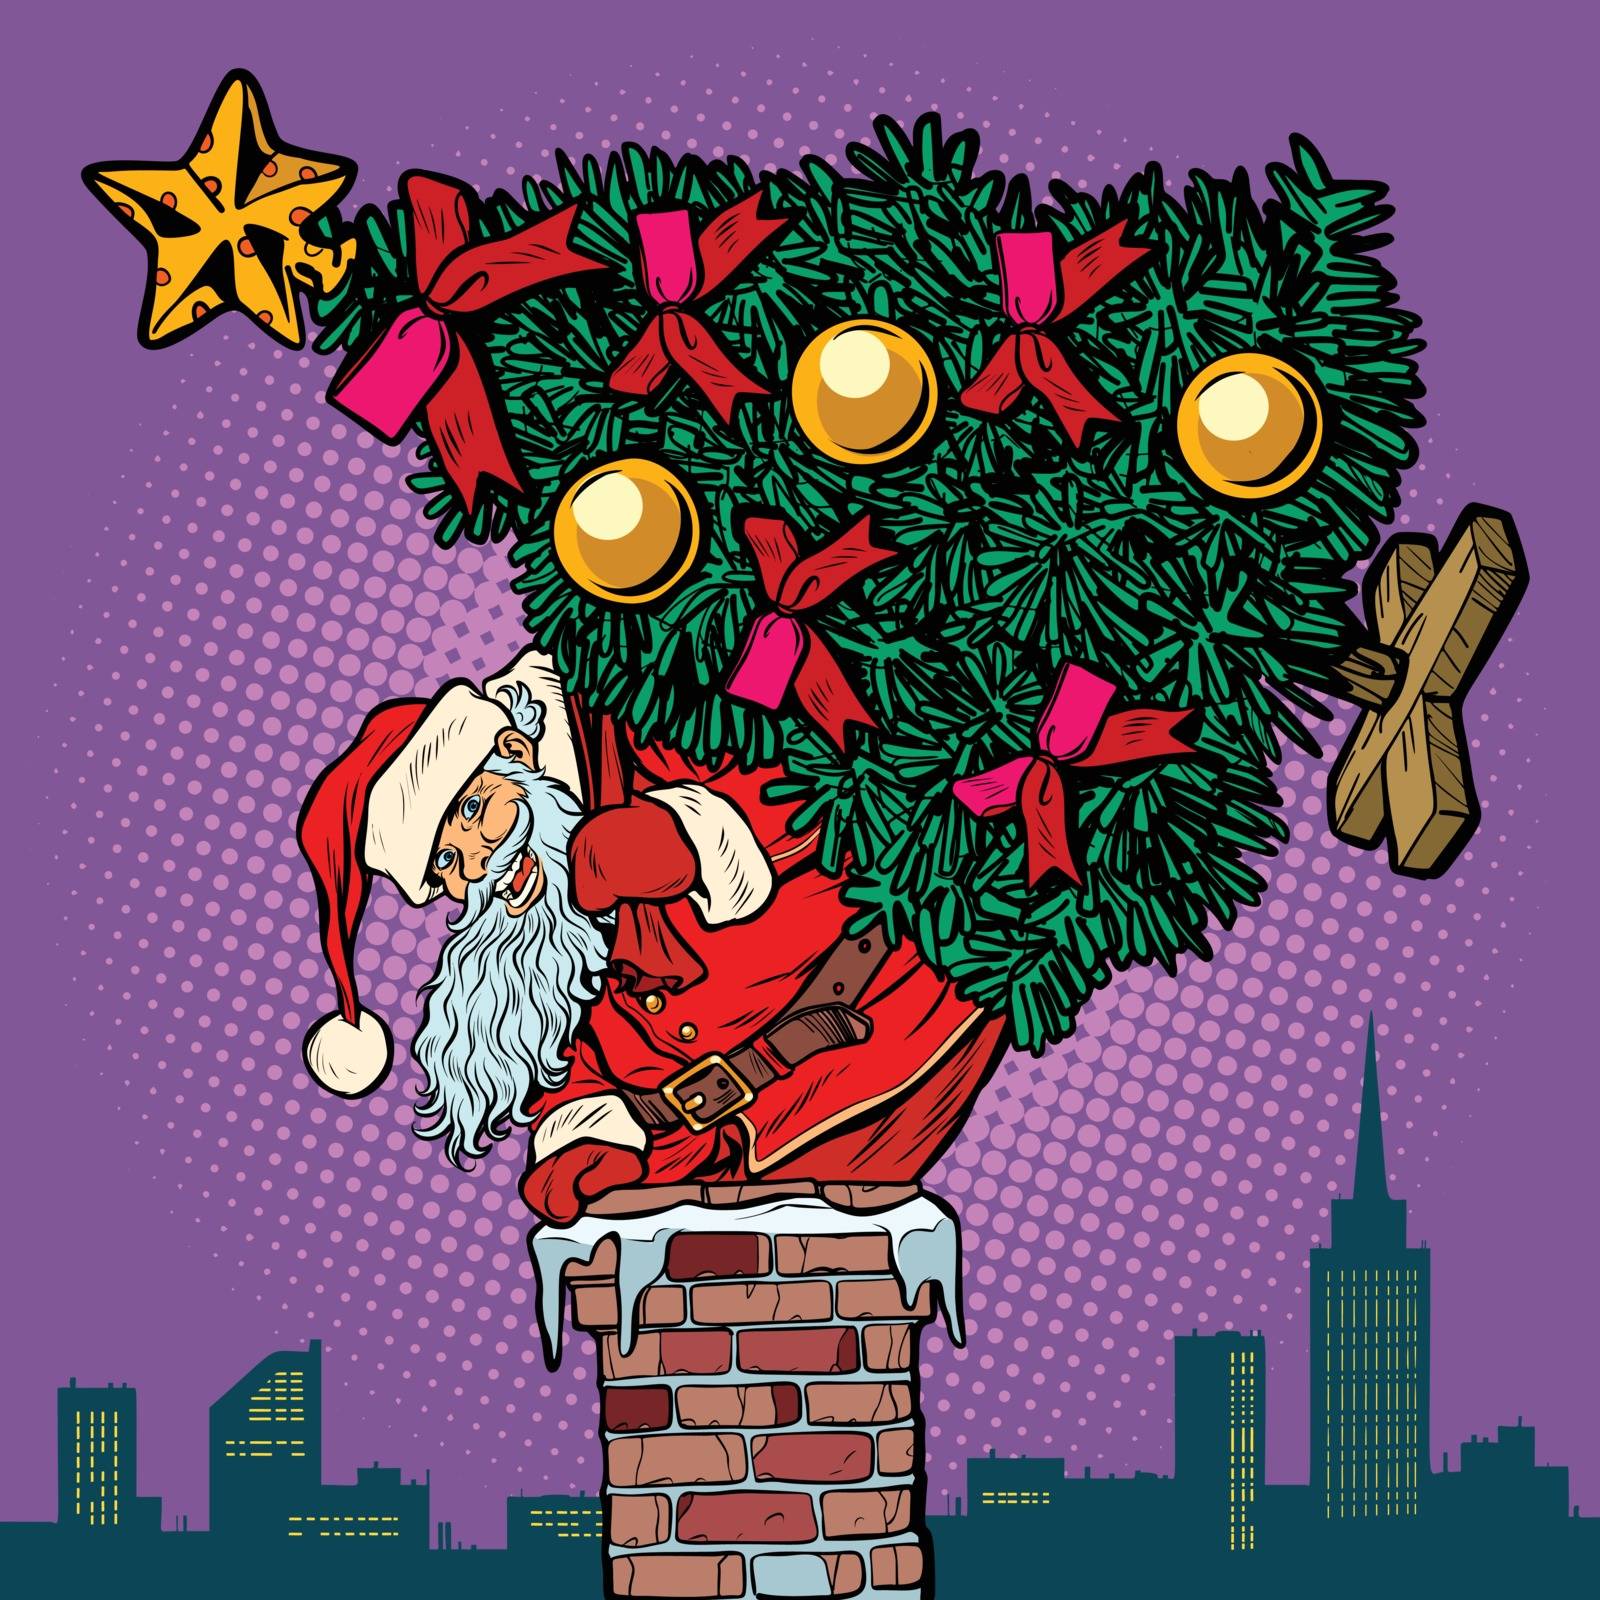 Santa Claus with a Christmas tree climbs the chimney. Pop art retro vector illustration vintage kitsch drawing